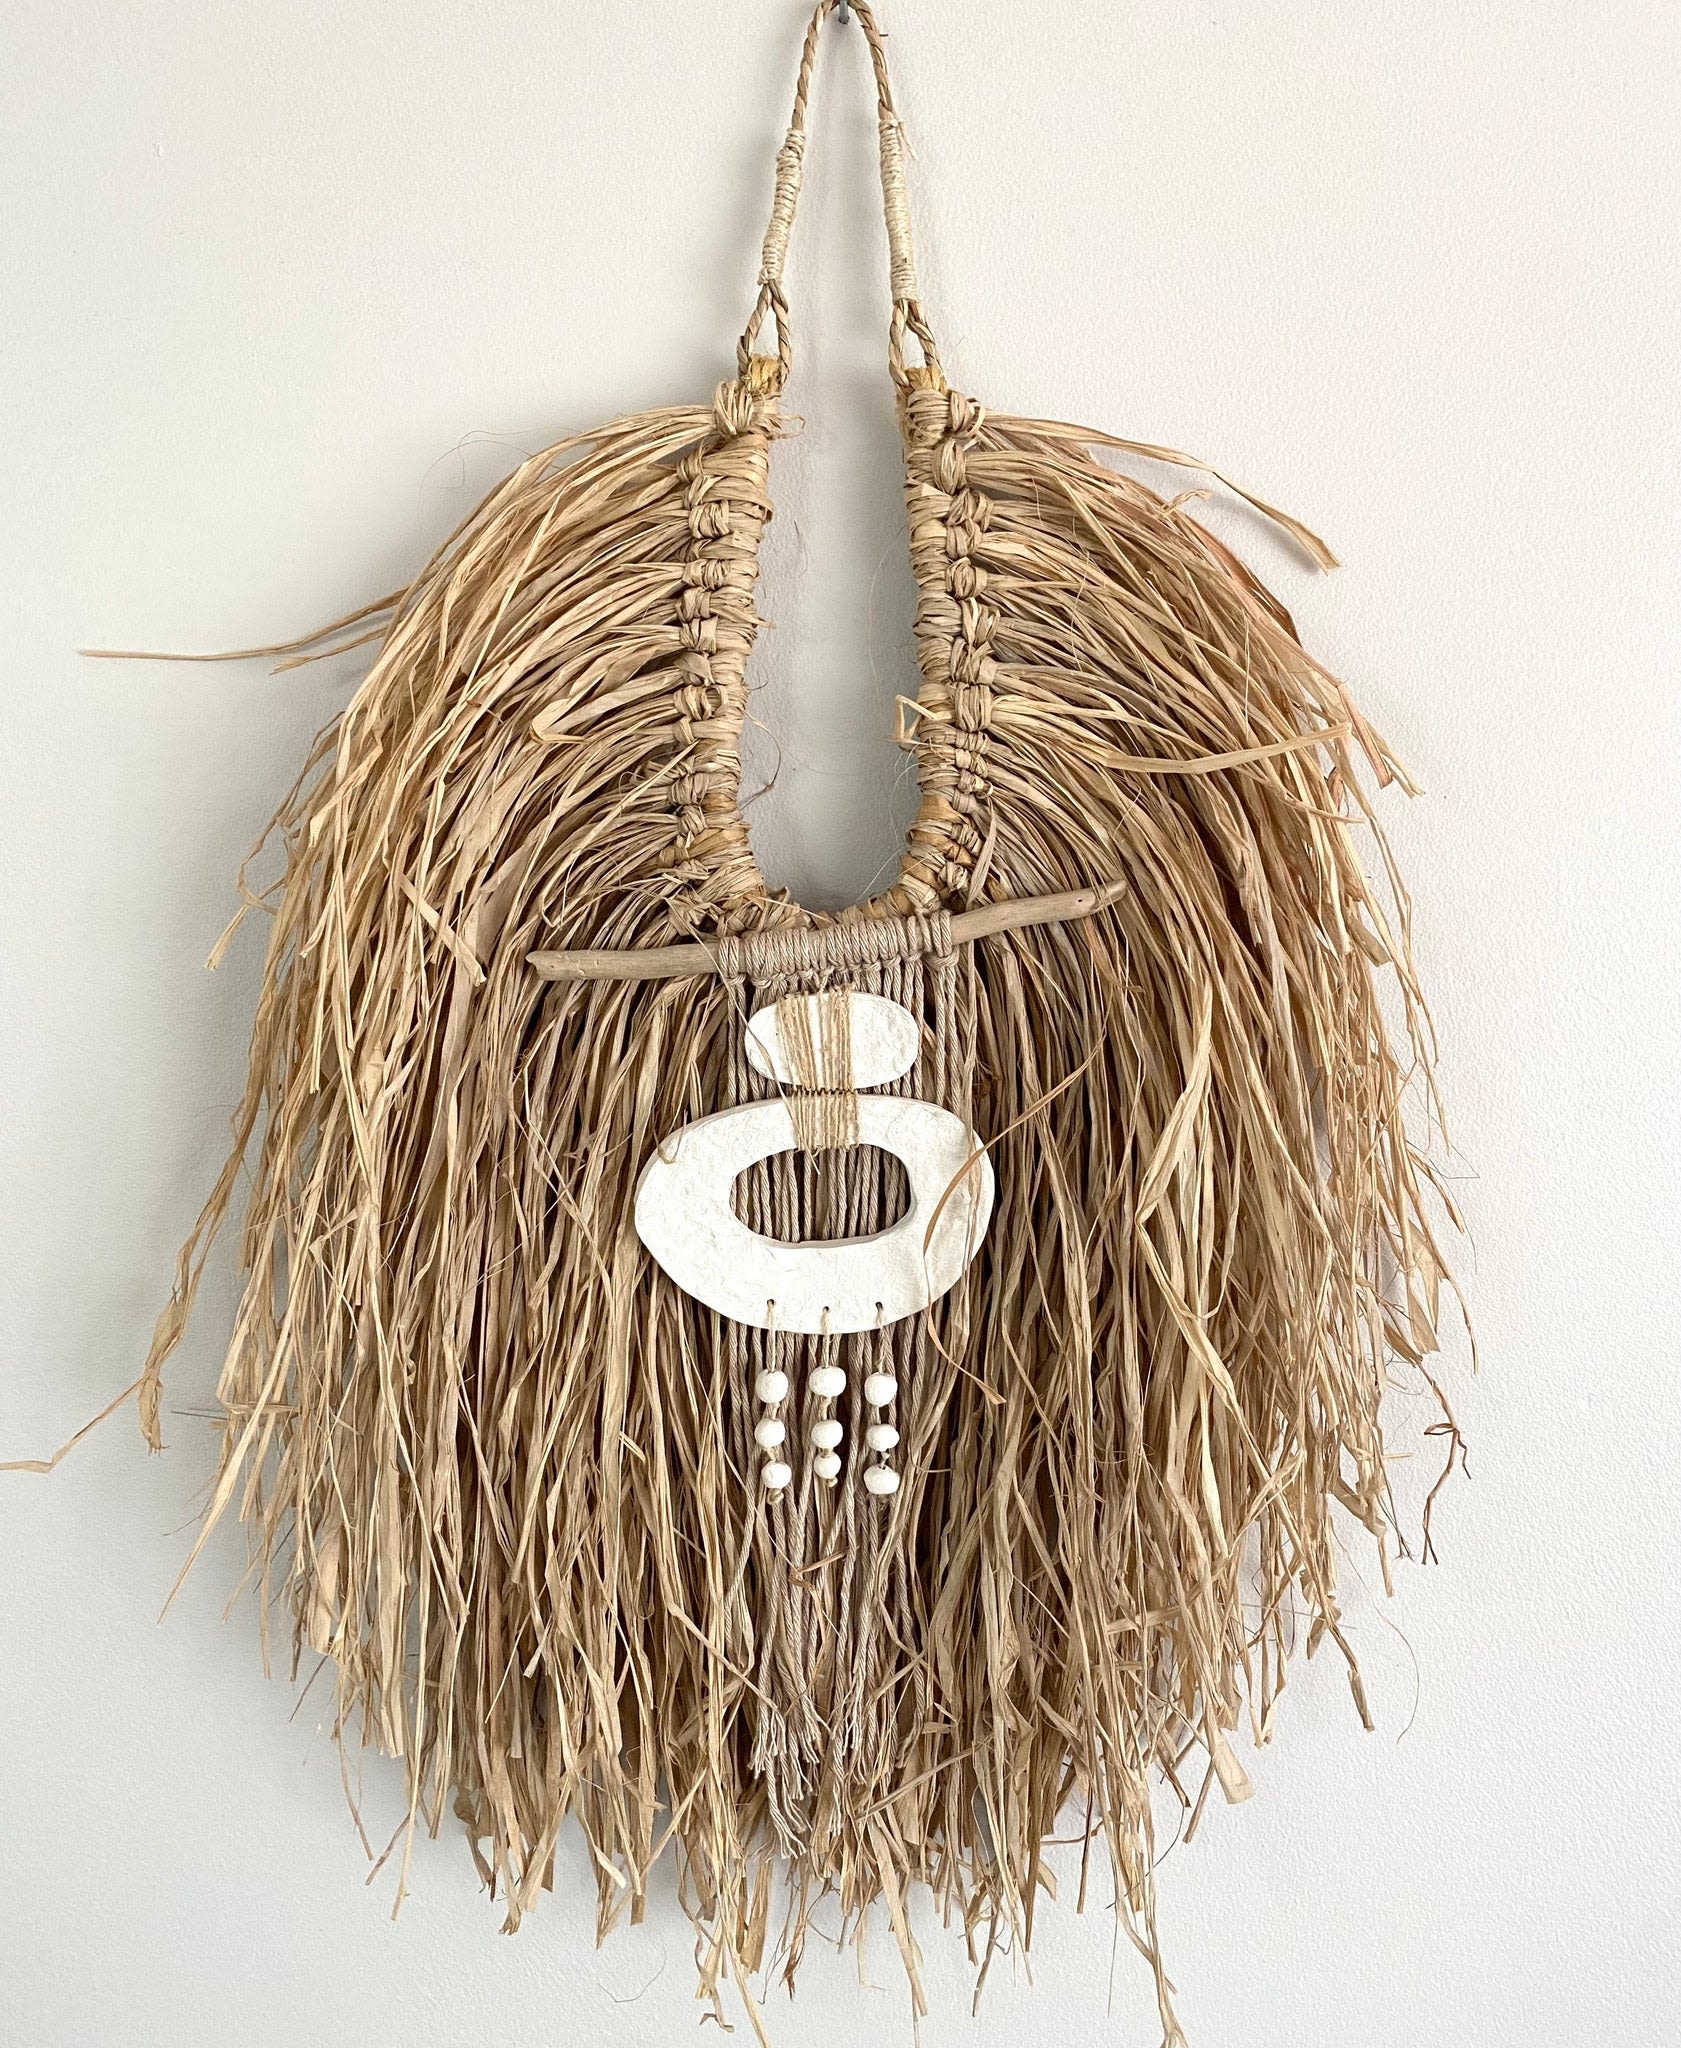 Raffia & Clay Wall Hanging by Karen louise | Wescover Wall Hangings